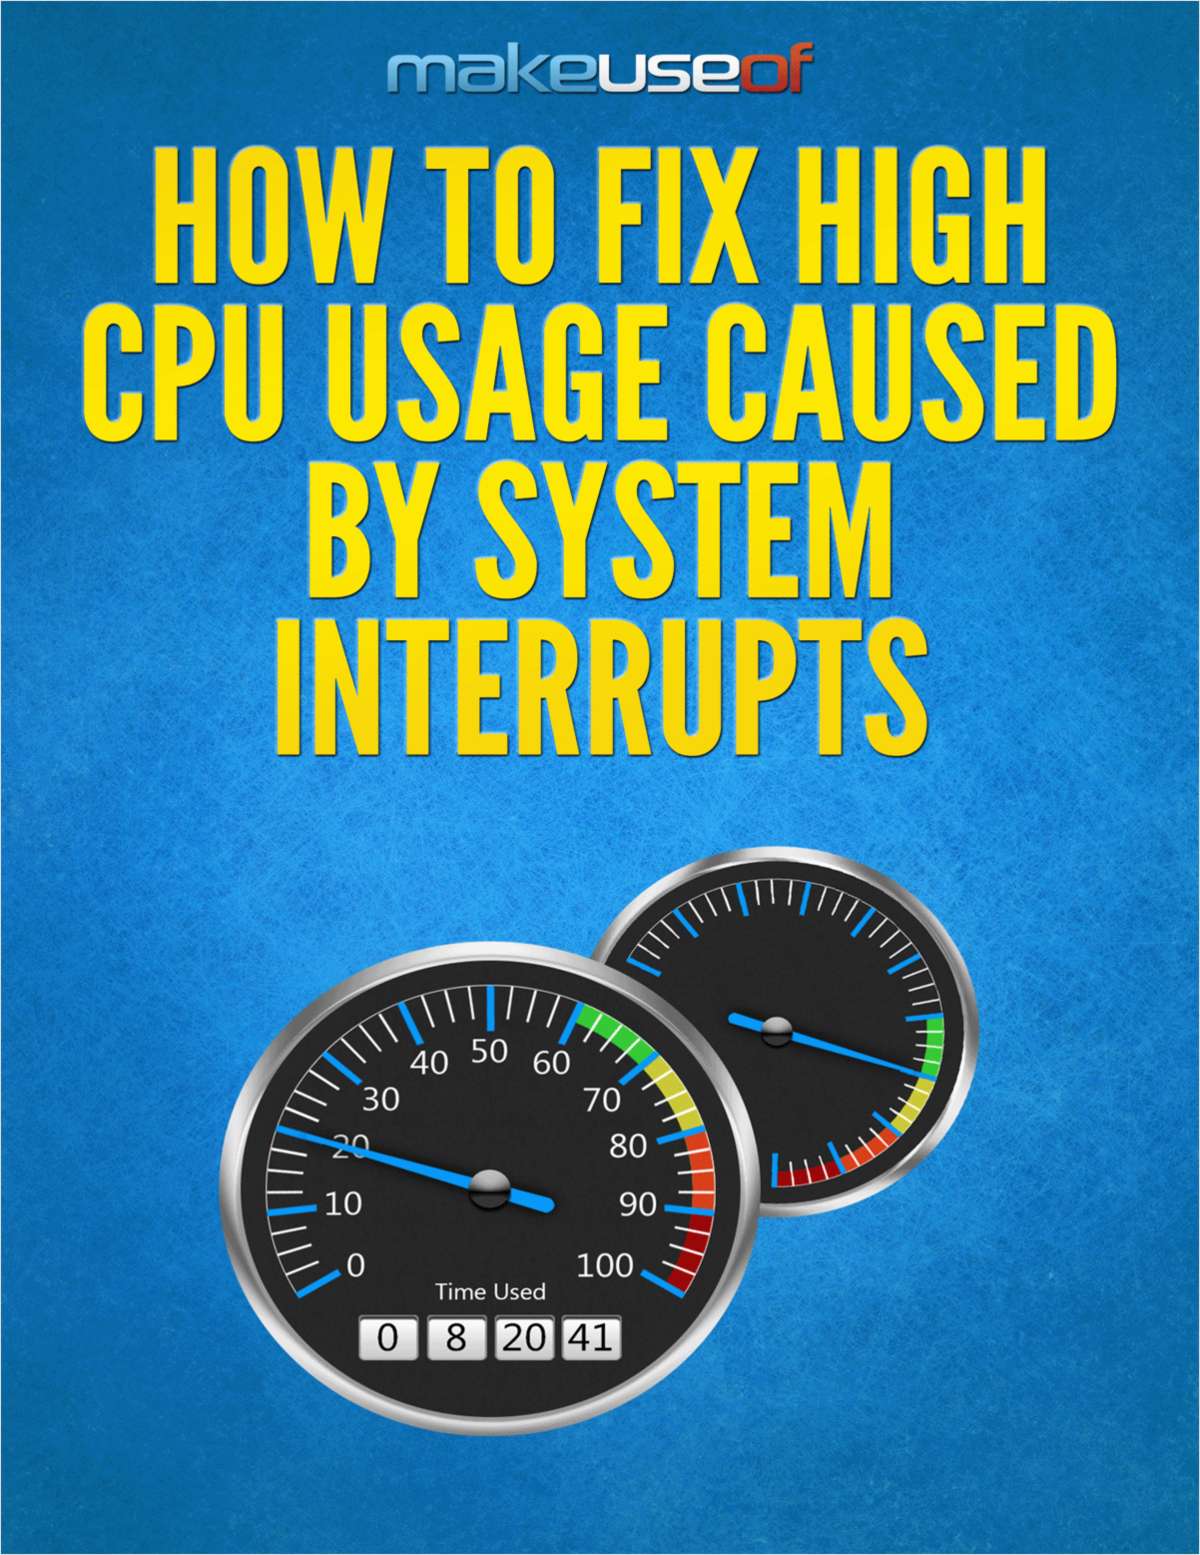 How to Fix High CPU Usage Caused by System Interrupts